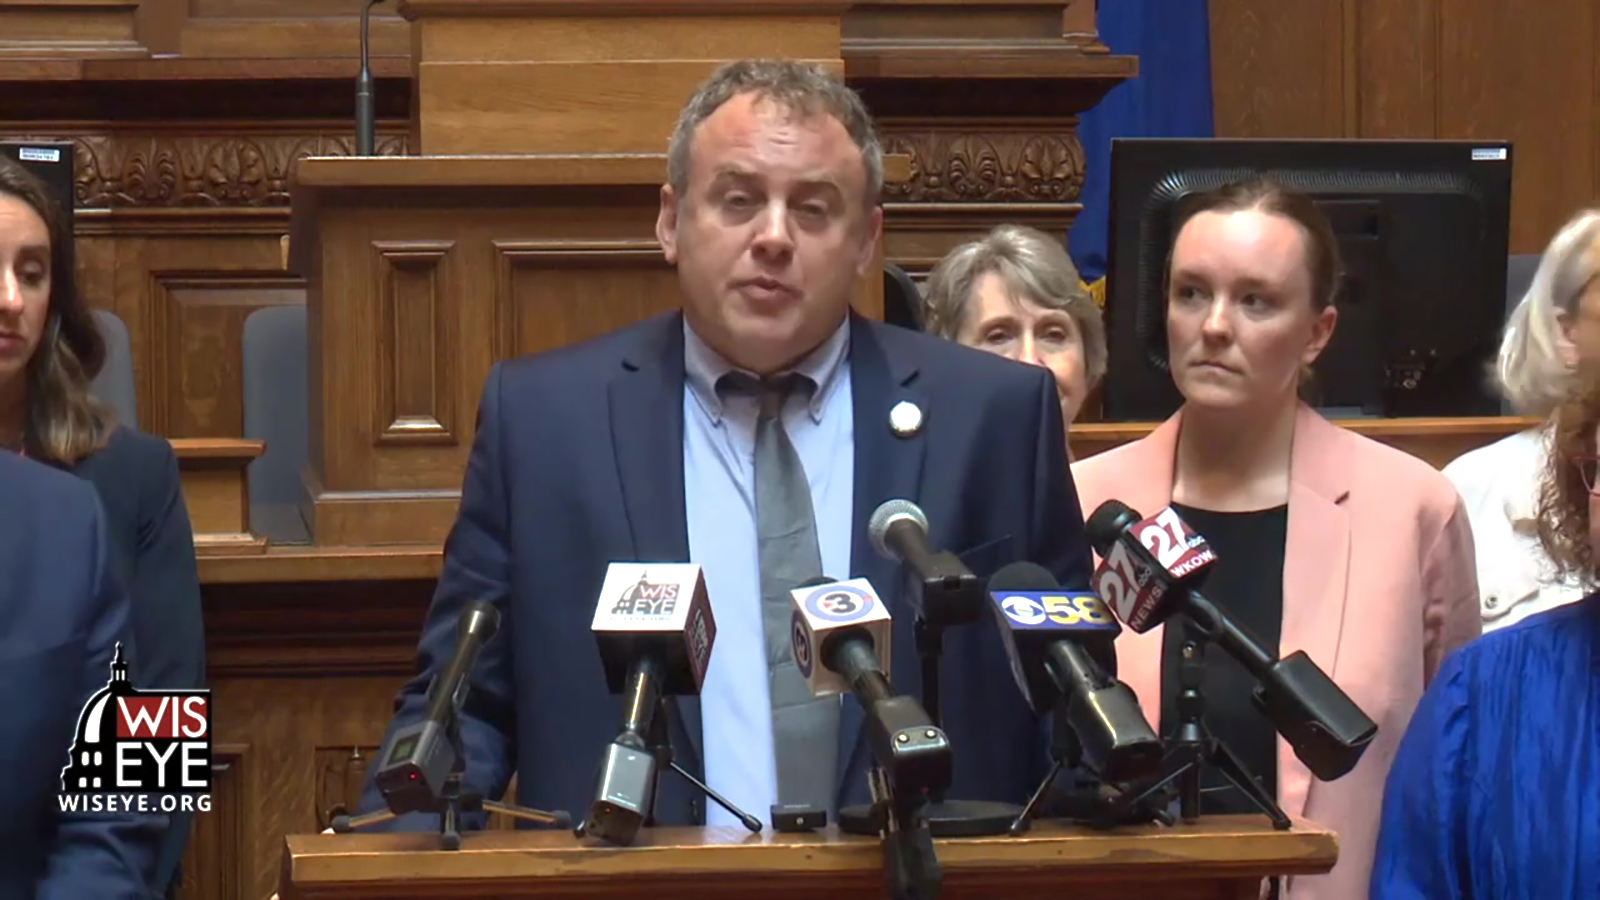 Screenshot of state Rep. Gordon Hintz speaking into microphones in Wisconsin Assembly chambers, surrounded by other Democrats.